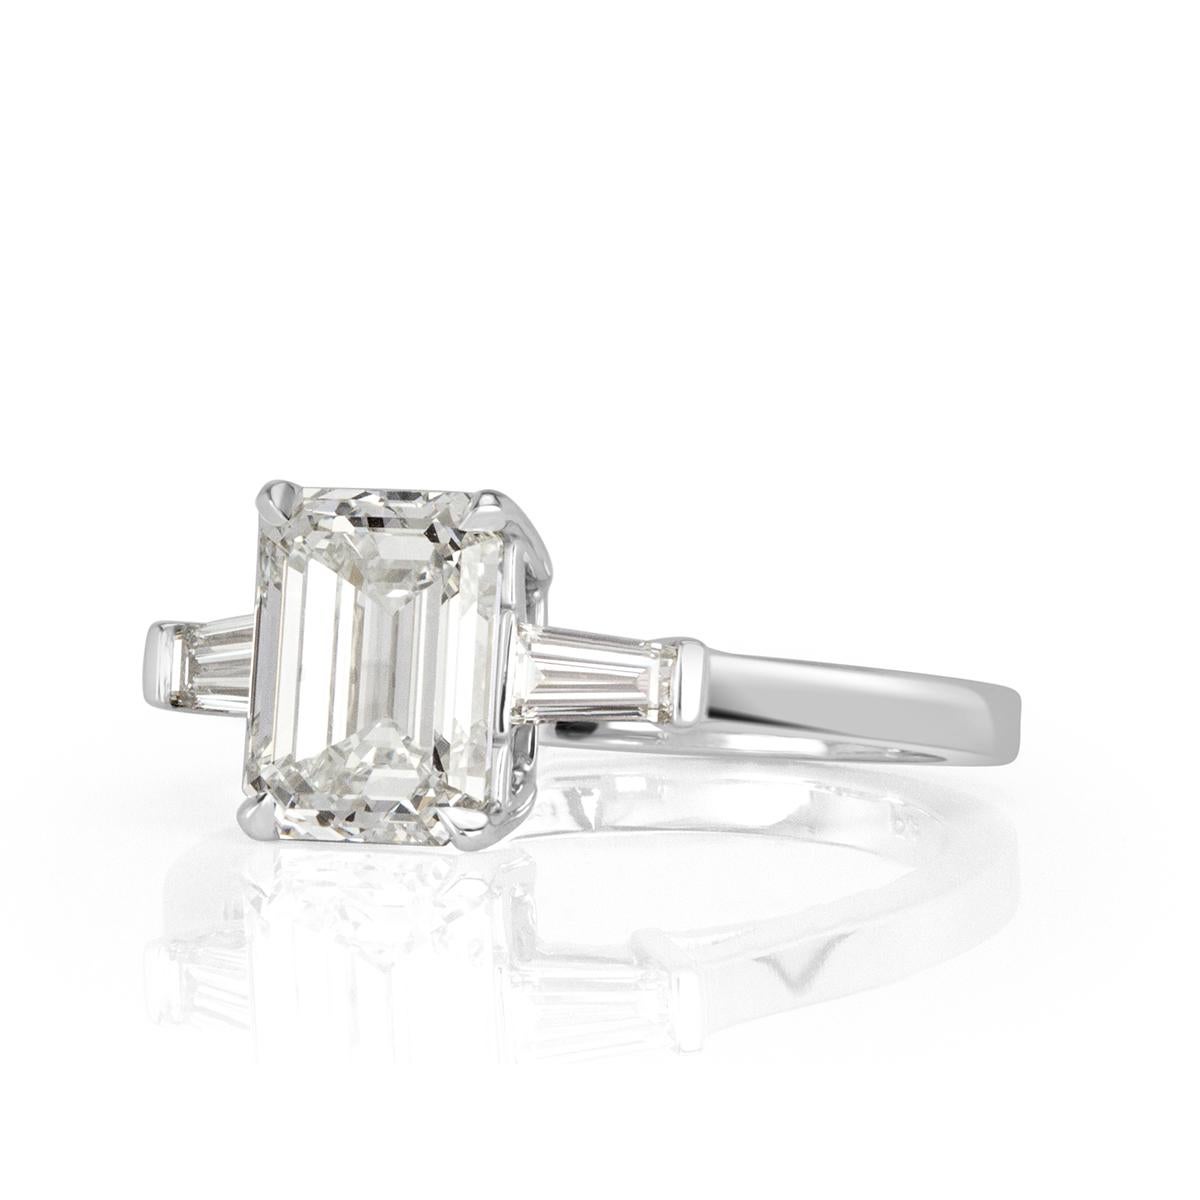 This stunning piece showcases a one of a kind 2.01ct emerald cut center diamond, GIA certified at I-VVS2. It faces up white and the clarity is outstanding! It measures an exceptional 8.25 x 6.13mm and is hand set in high polish platinum. It is